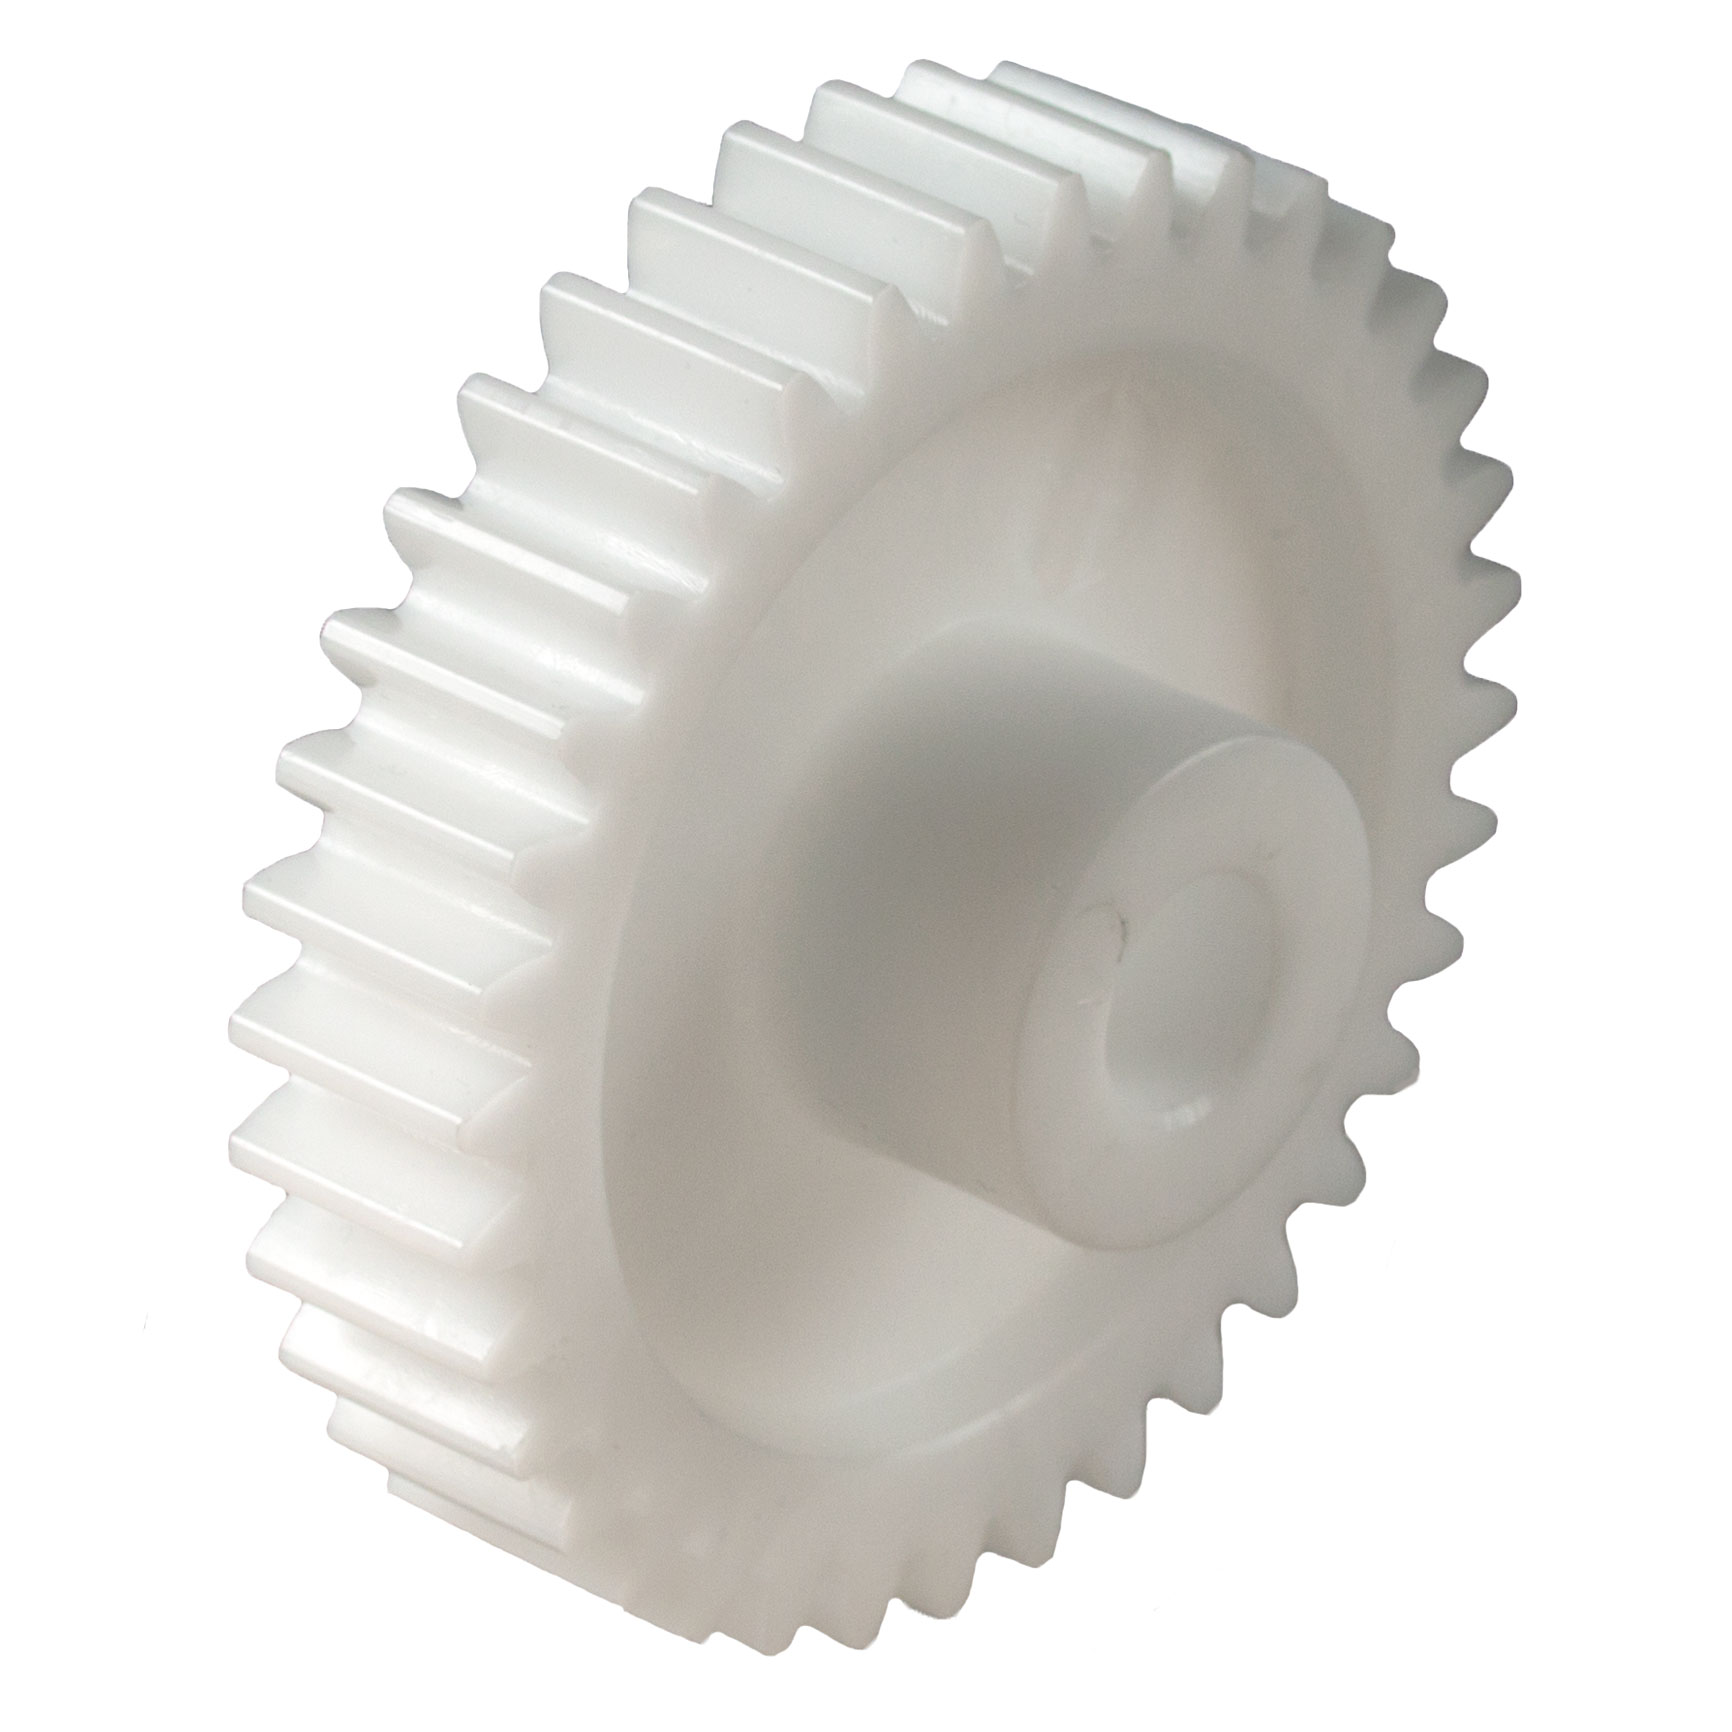 Spur gear made of polyacetal resin die-cast with hub module 2 19